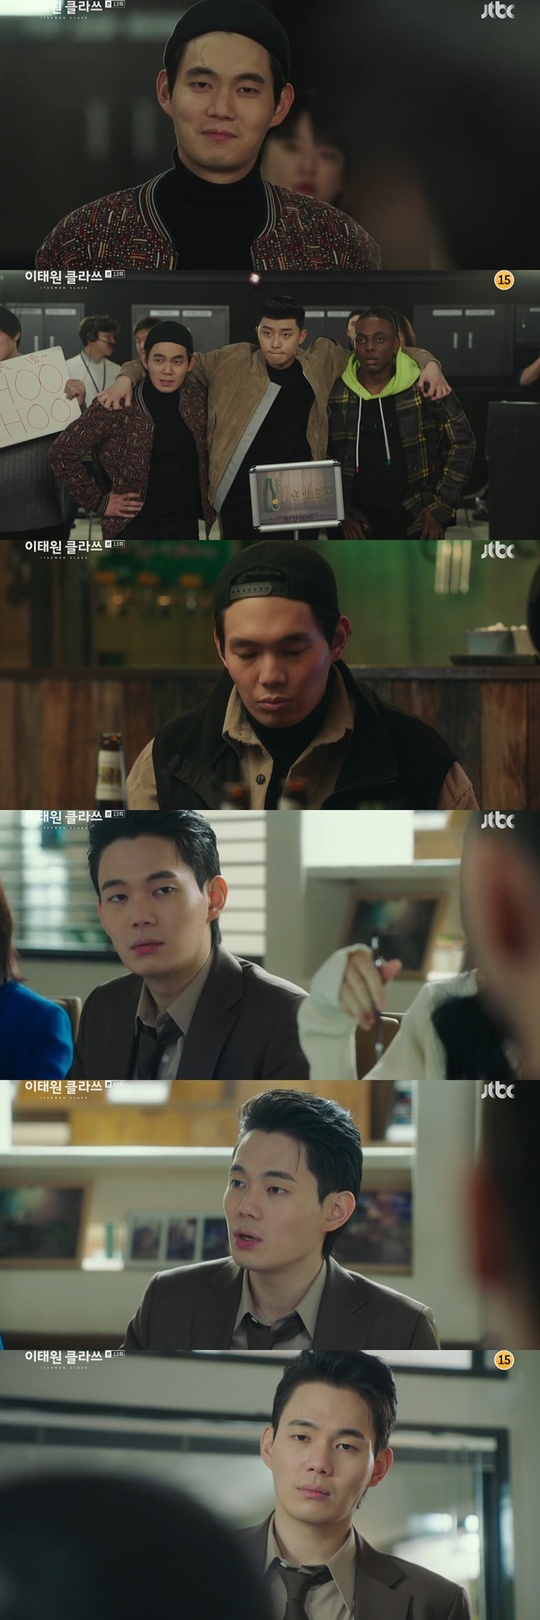 Actor Ryu Kyong-su has become the head of the IC with his extraordinary sincerity.In JTBCs Golden Drama Itaewon Clath broadcast on March 13, Ryu Kyong-su appeared in a different shape four years later.On the same day, Ryu Kyong-su expressed his infinite belief that Hyun-yi (Lee Joo-young) will never be shaken even in unexpected personal information.As if Danbam had won the final in the contest, and at the same time, the Danbam family held the chef Hyun-yi and could not hide the joy of winning.Finally, all the successful families of the night gathered to unravel the meeting.Here, the winning ticket was presented with a new look of hope, chewing on the words of Park Seo-joon.Four years later, Danbam grew into an IC that spreads to the world, and the ticket also appeared as the head of the general affairs department, attracting viewers attention.However, the winning ticket still showed Kimi, who is a real friend, as he was still in a hurry with his family.As such, Ryu Kyong-su has dissolved his affection and respectful heart to small words and actions, as if he represented the victory of living a second life due to the new life, and increased the immersion of the drama.In addition, when he was a hole-serving person at night or a general manager of the IC, he completely snipped the viewers tastes by completely digesting the winning rights with pure charm.As such, Ryu Kyong-su has not only taken the eyes of viewers with stable acting ability and delicate expression, but also led to support and support for Itaewon Clath.Park Su-in